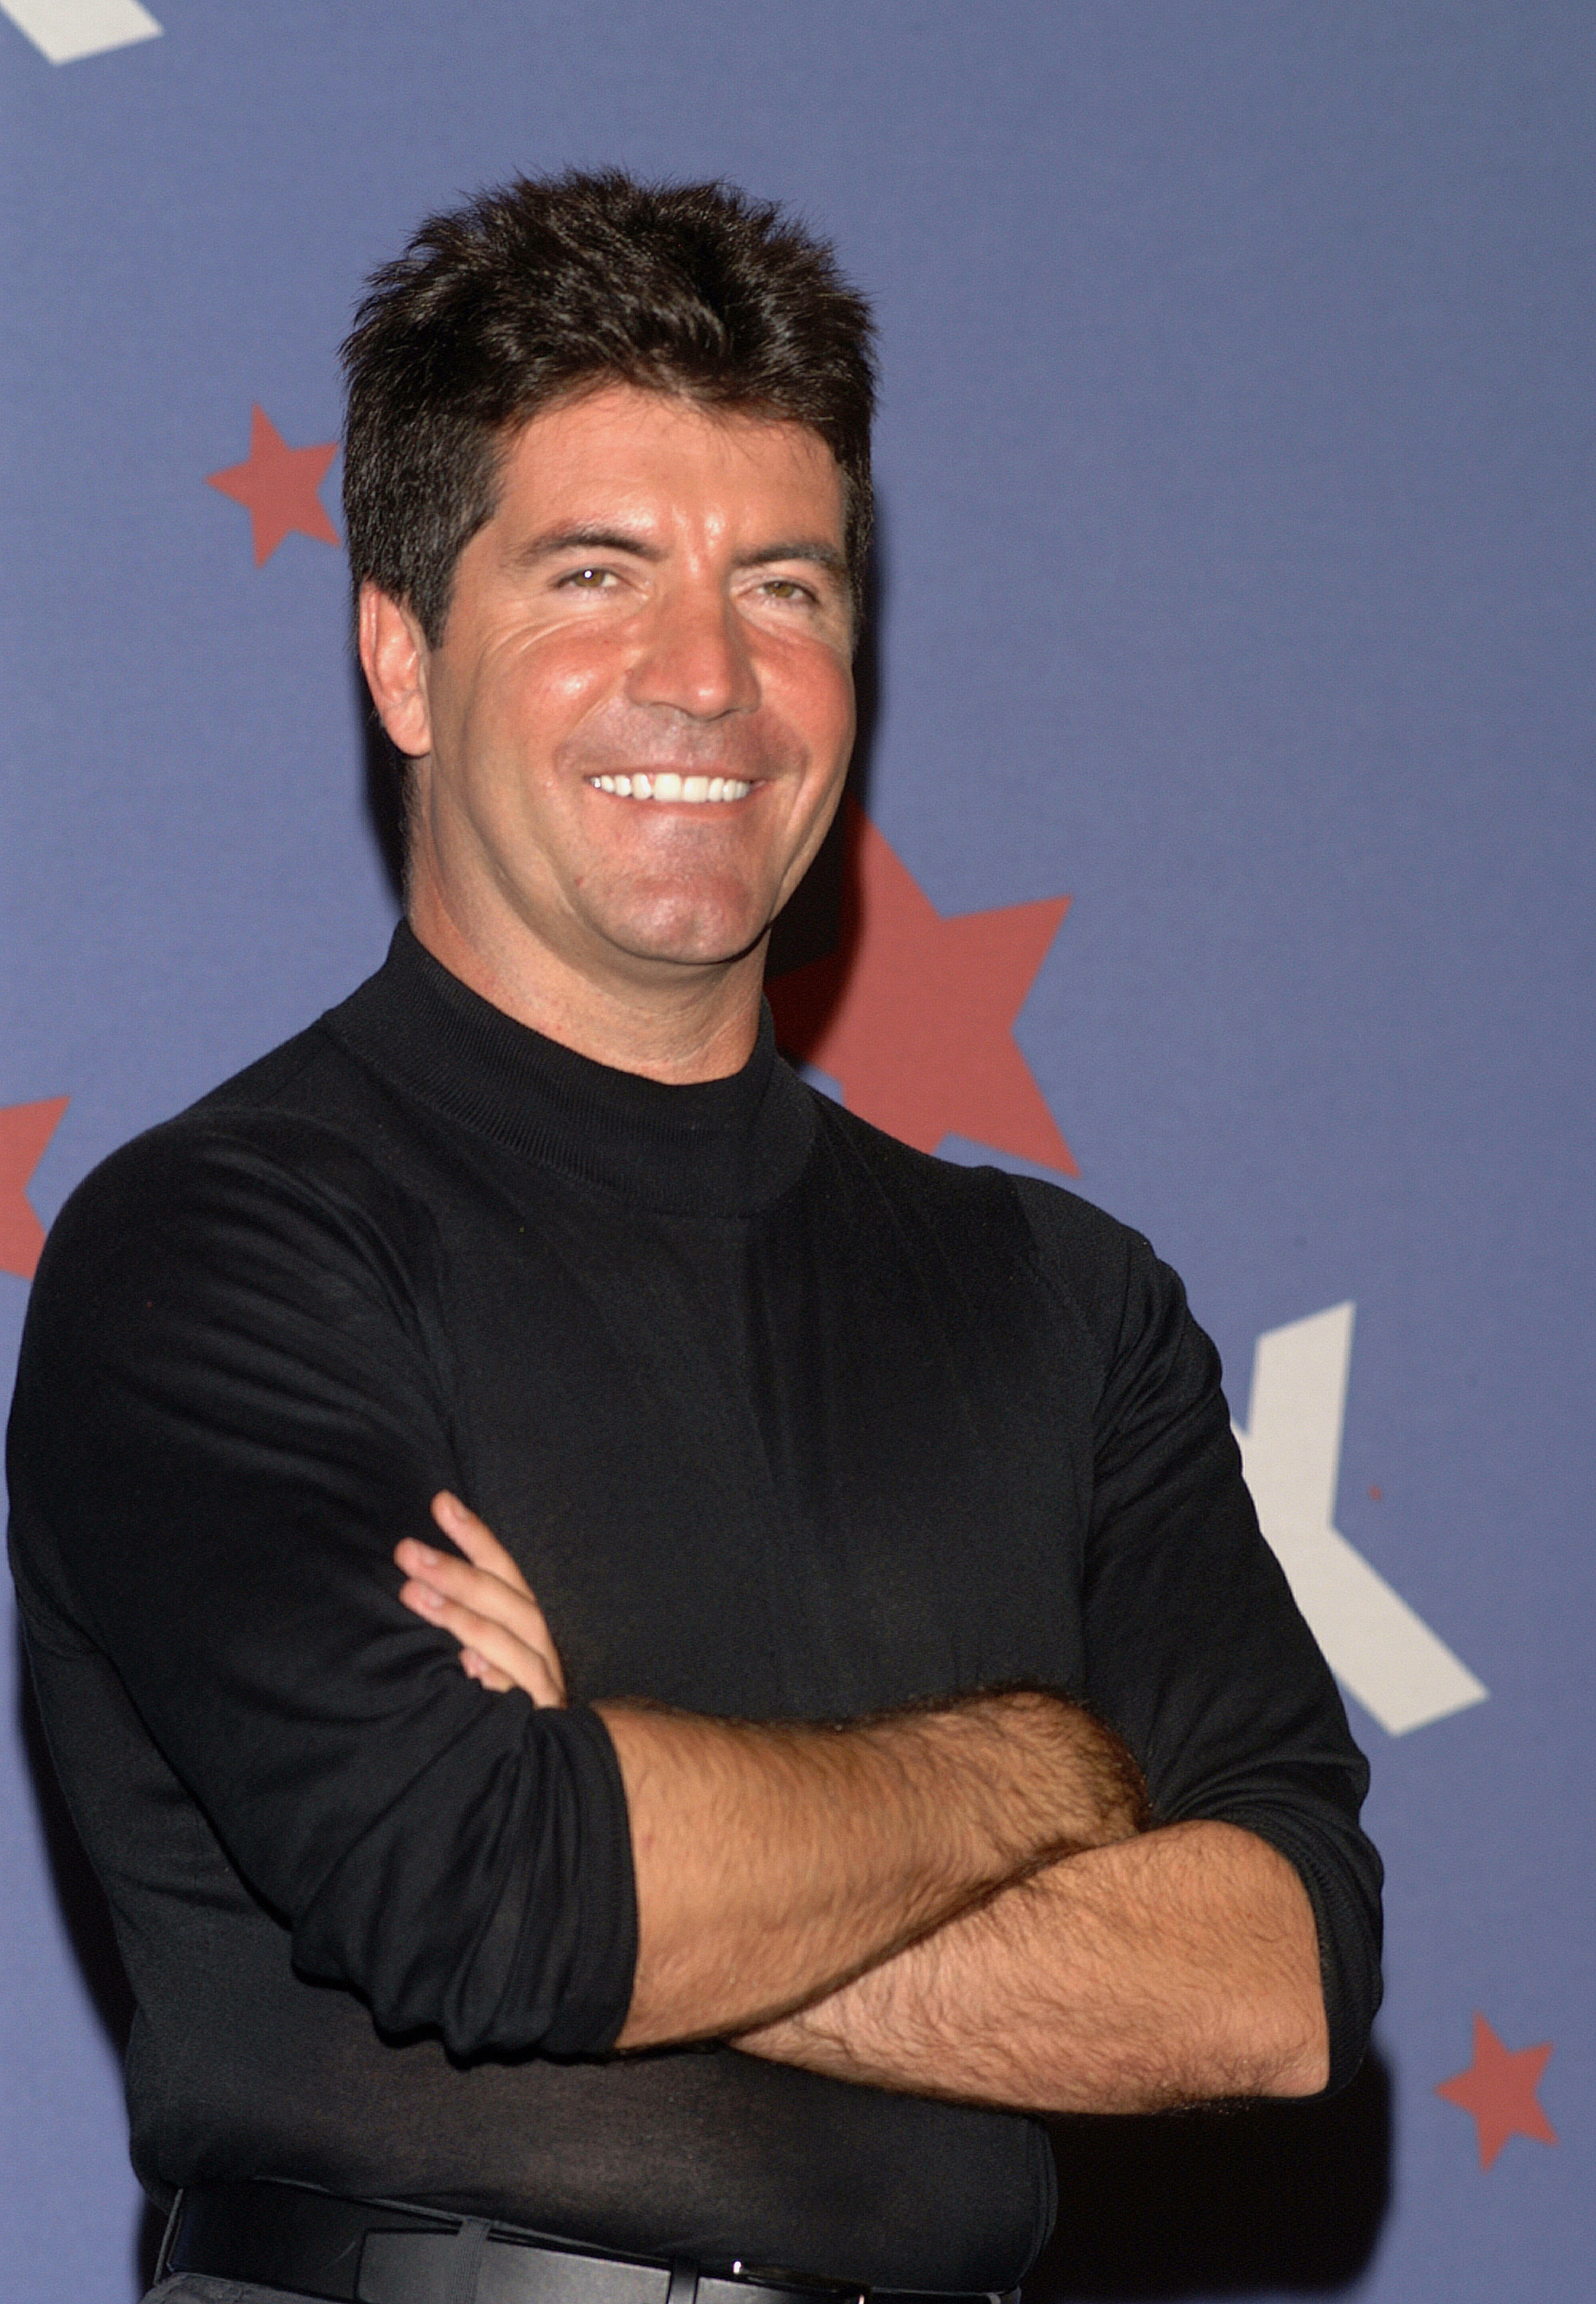 Simon Cowell during "American Idol" Season 1 Finale in Hollywood, California on September 4, 2002 | Source: Getty Images